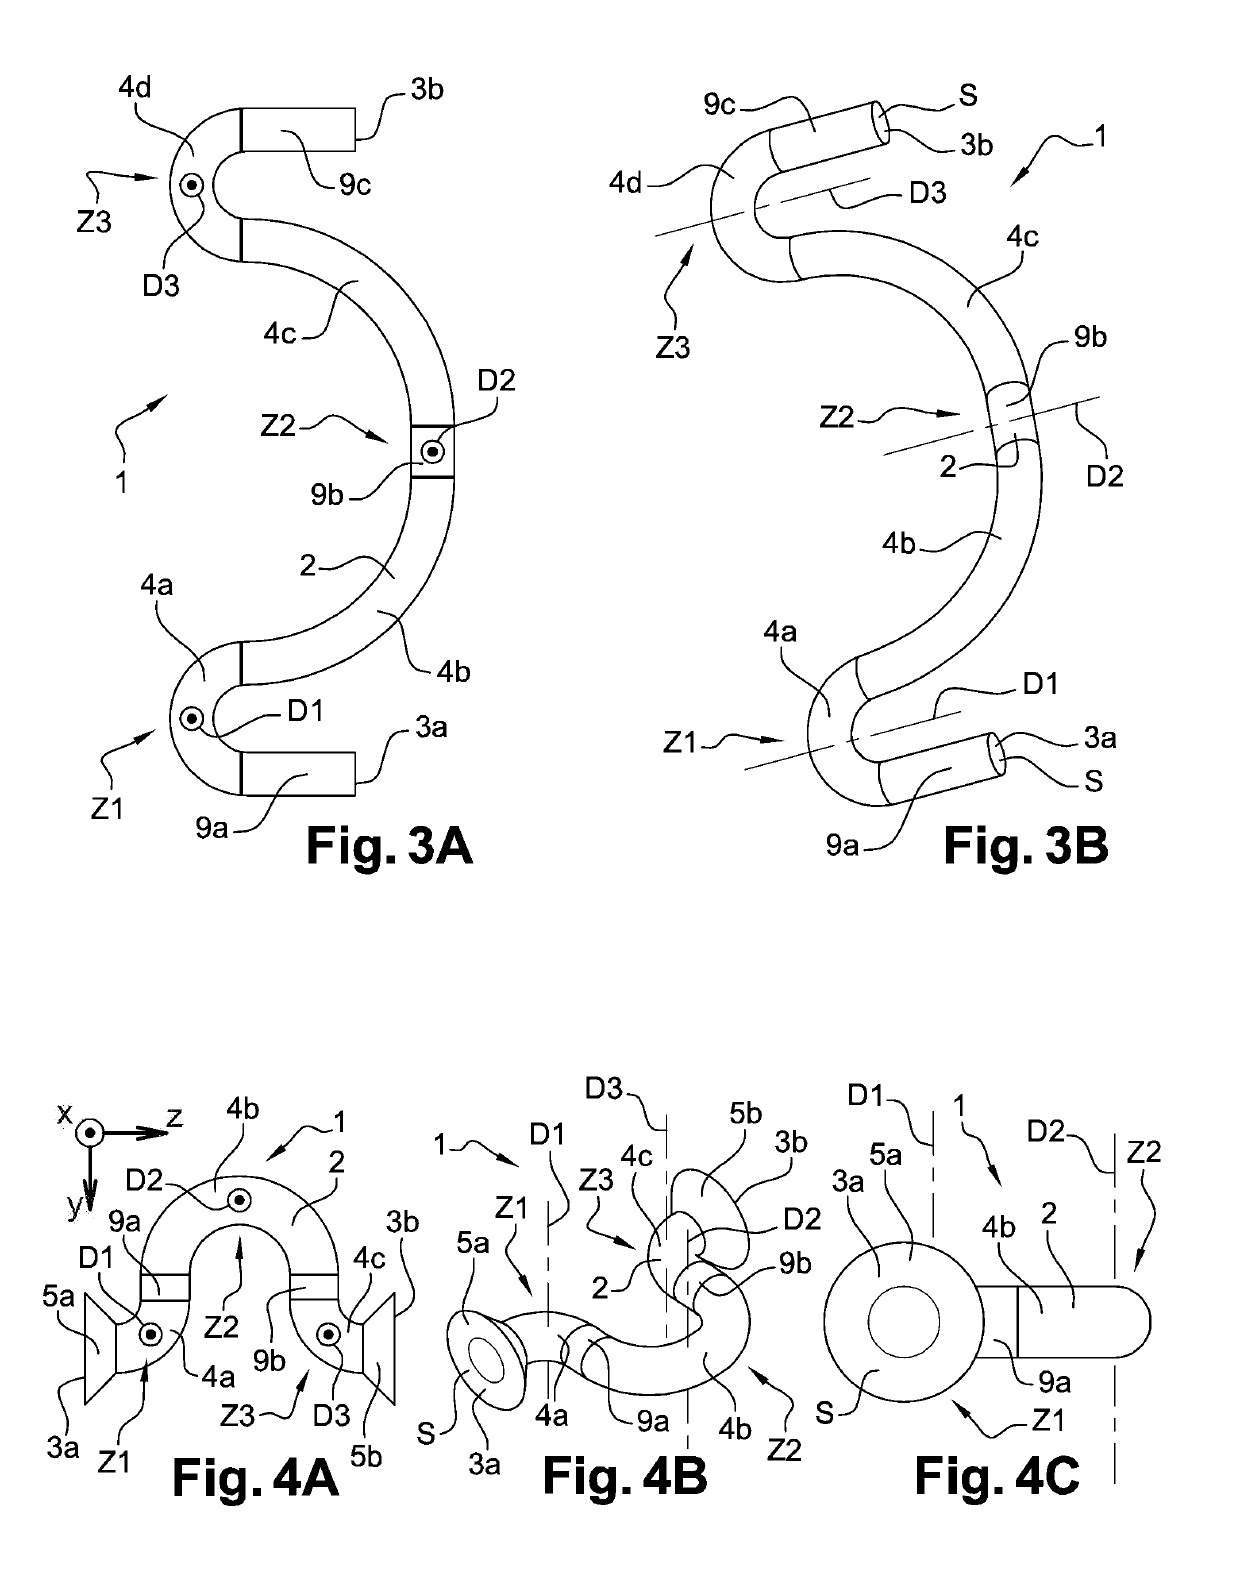 Electrical connectors having a bent main body for electrical connection between a housing and a support, and being disposed as a grid array or network